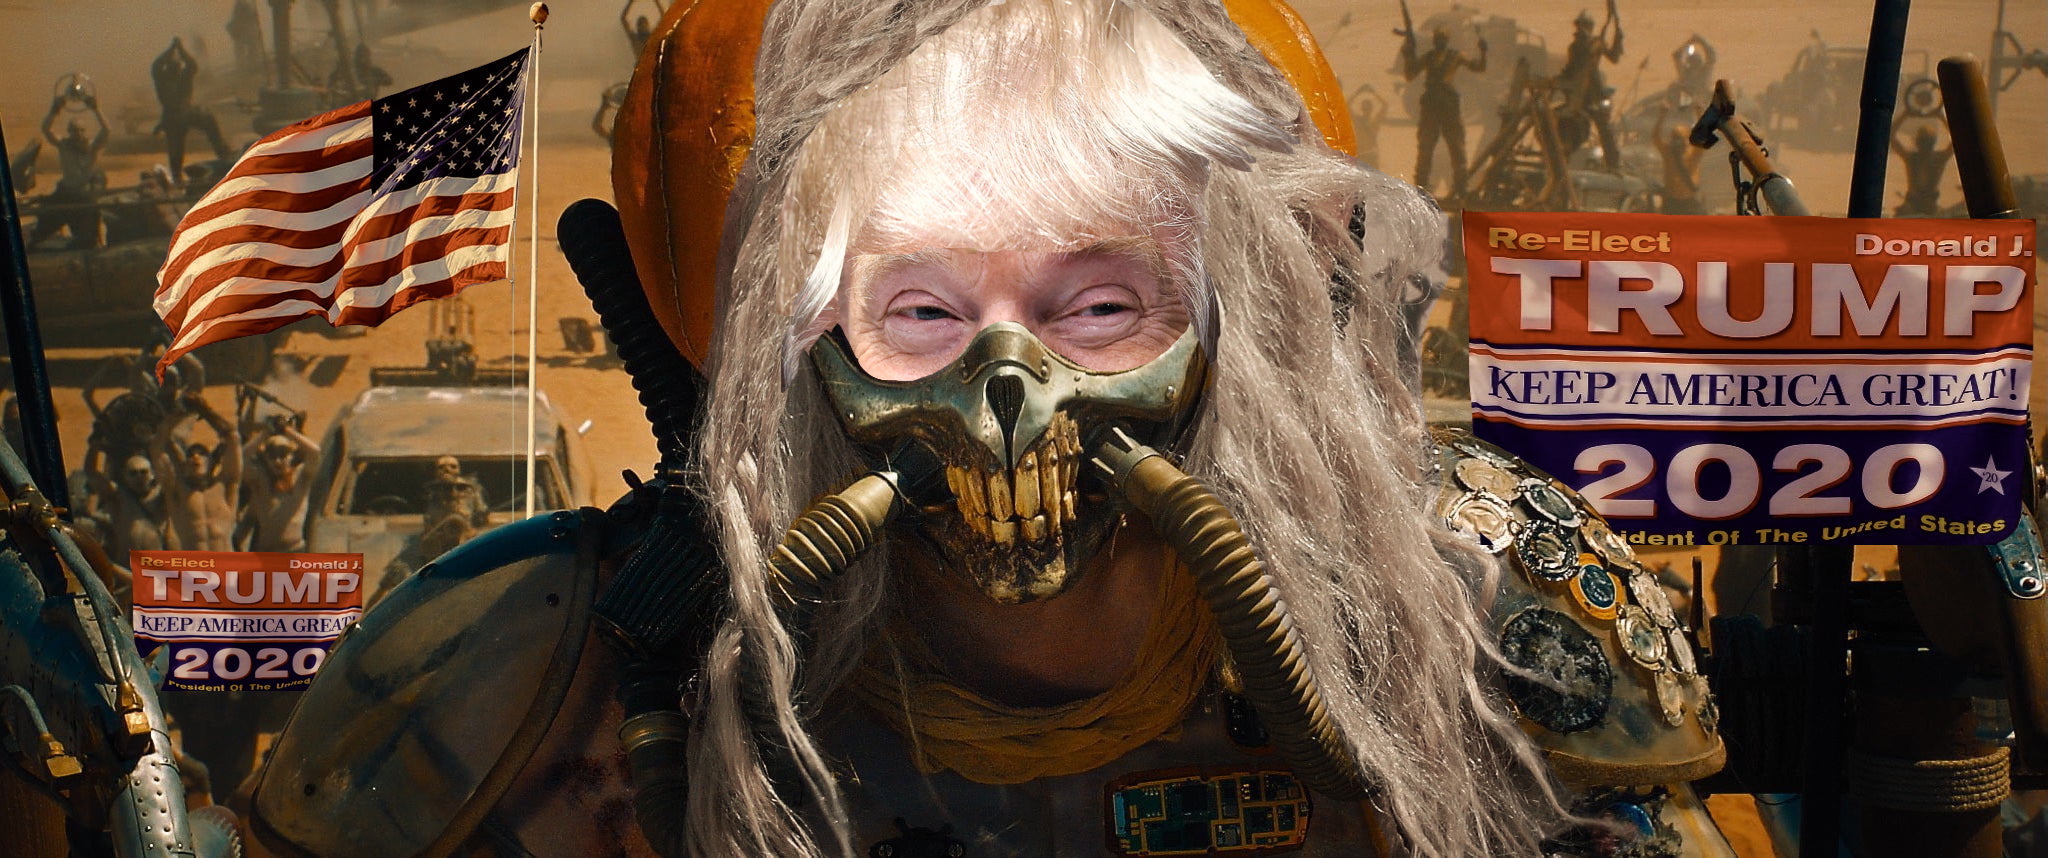 trump-re-election-campaign-2020-mad-max-fury-road Blank Meme Template